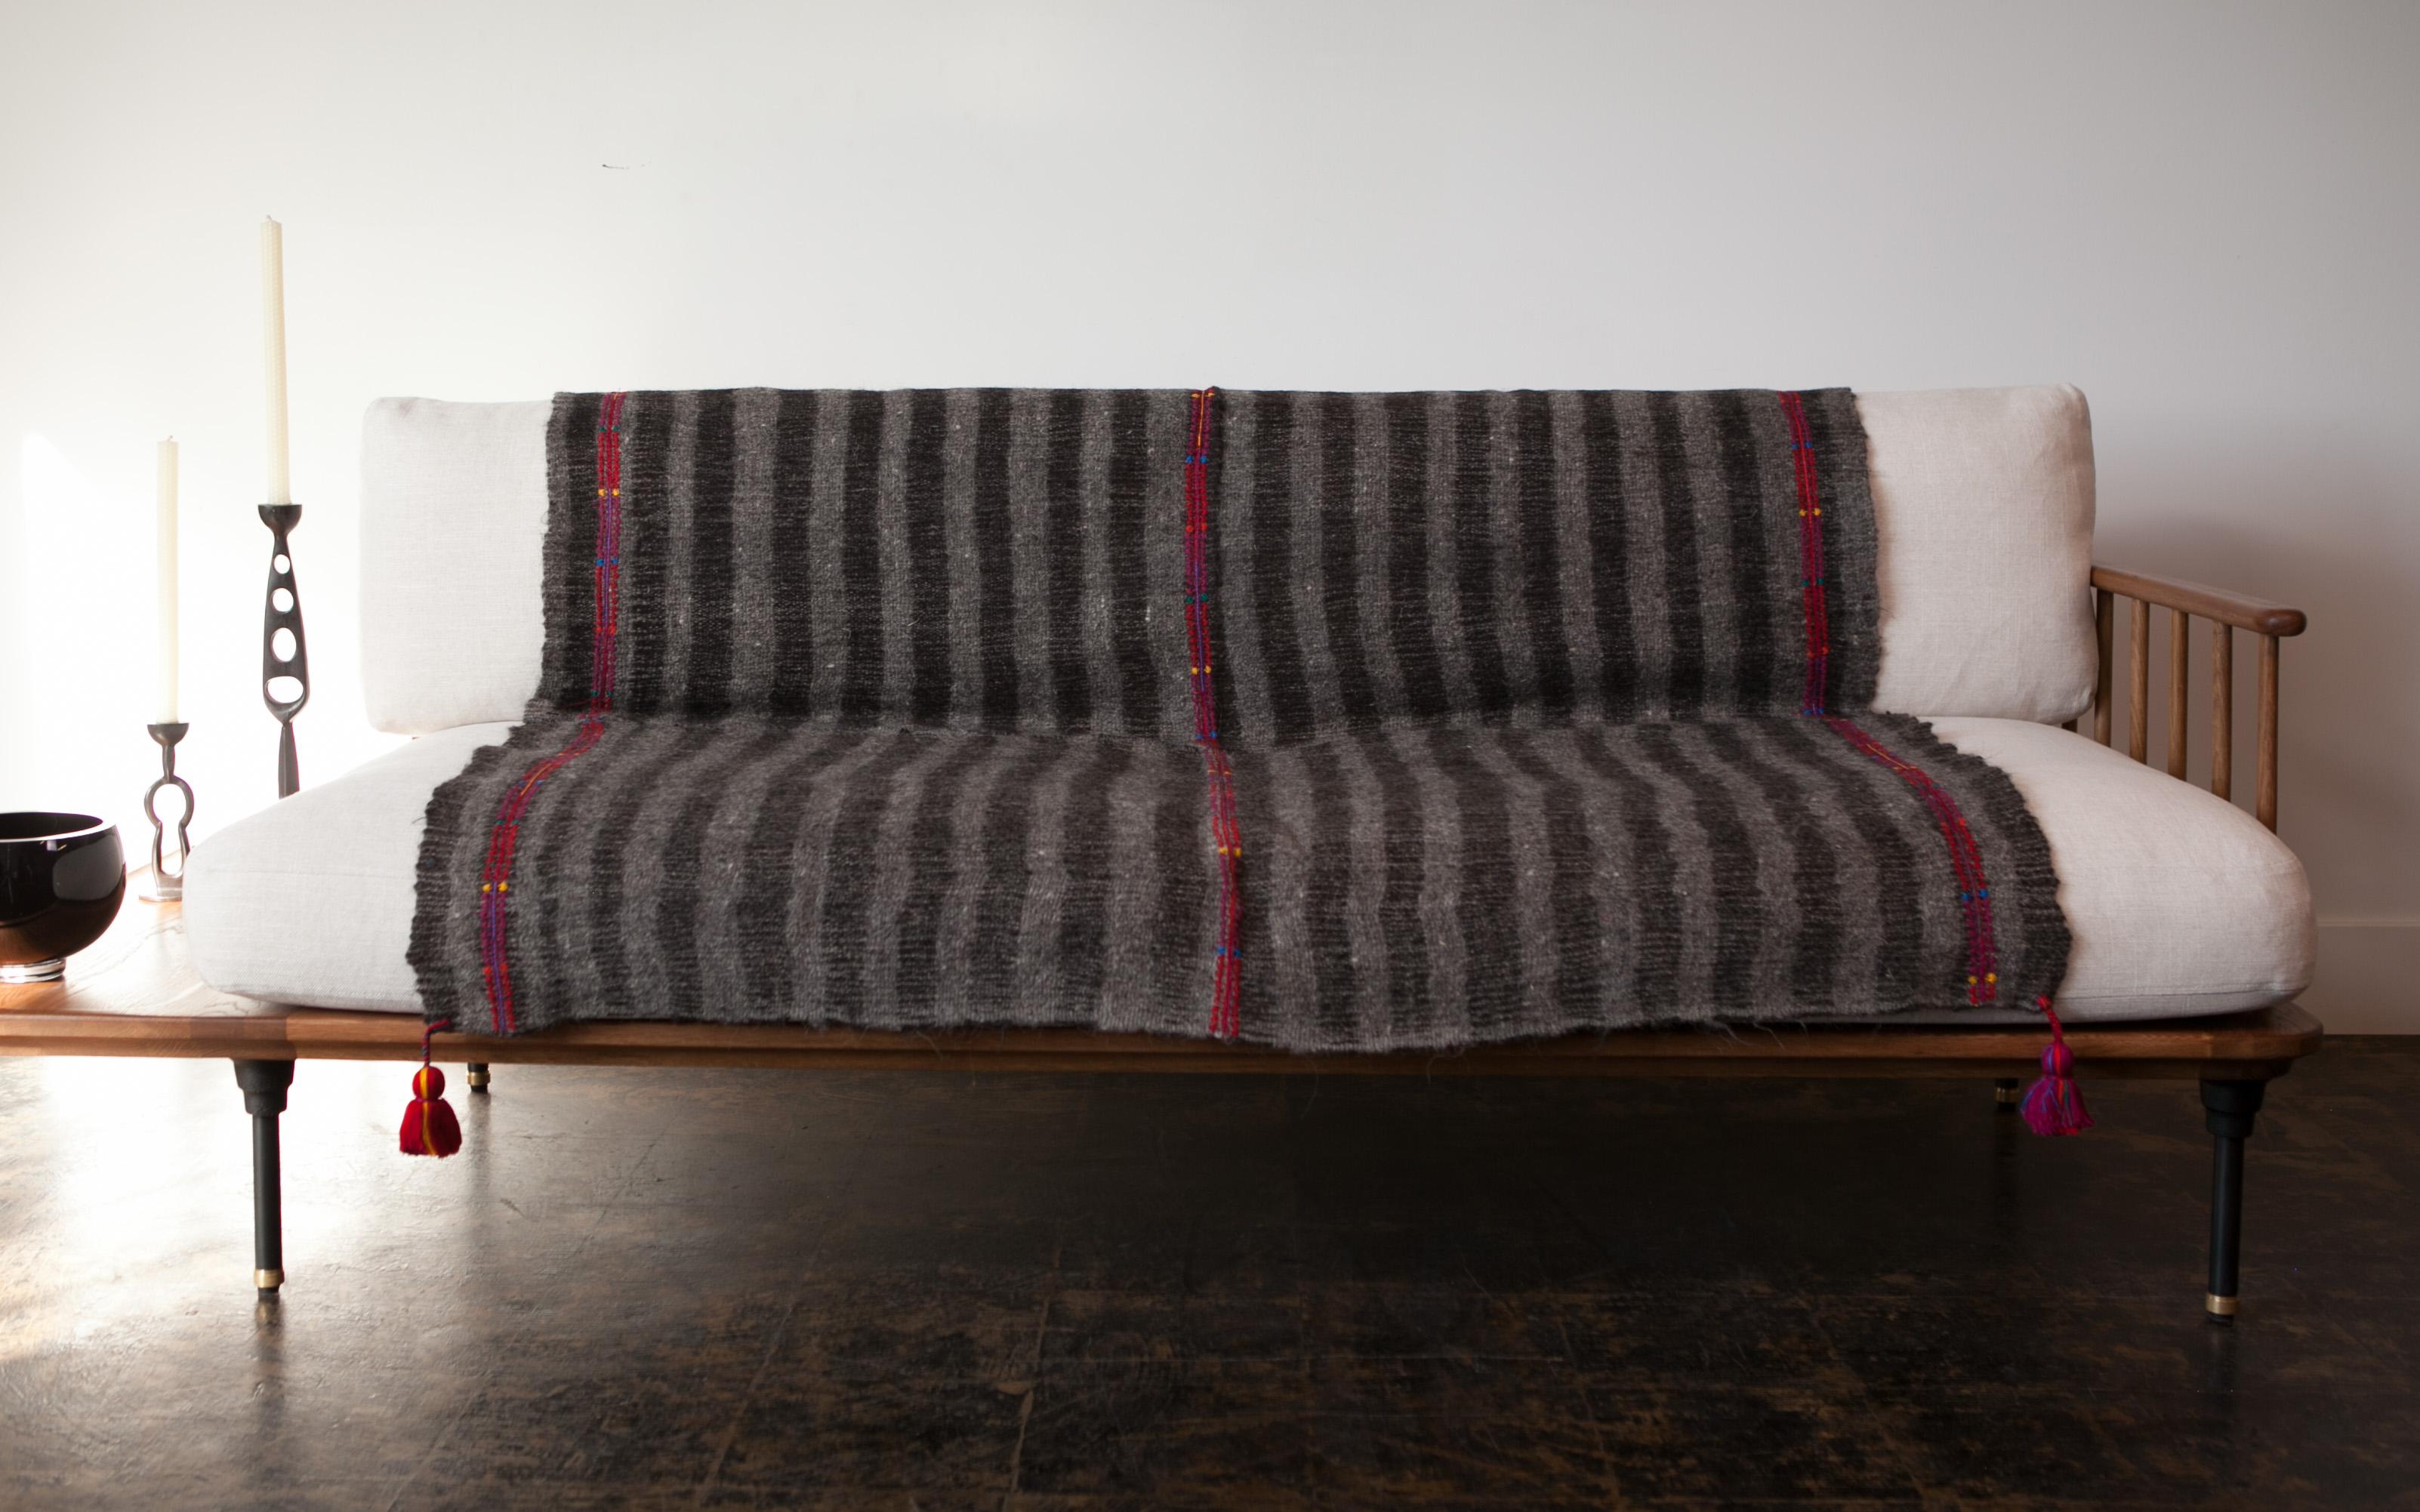 Handwoven on backstrap looms in Chamula, Chiapas, the textile of this delightful throw is made 100% from wool sheared from Chamula community sheep, considered sacred in local culture, embroidered and decorated with red pompoms dyed with cochineal.